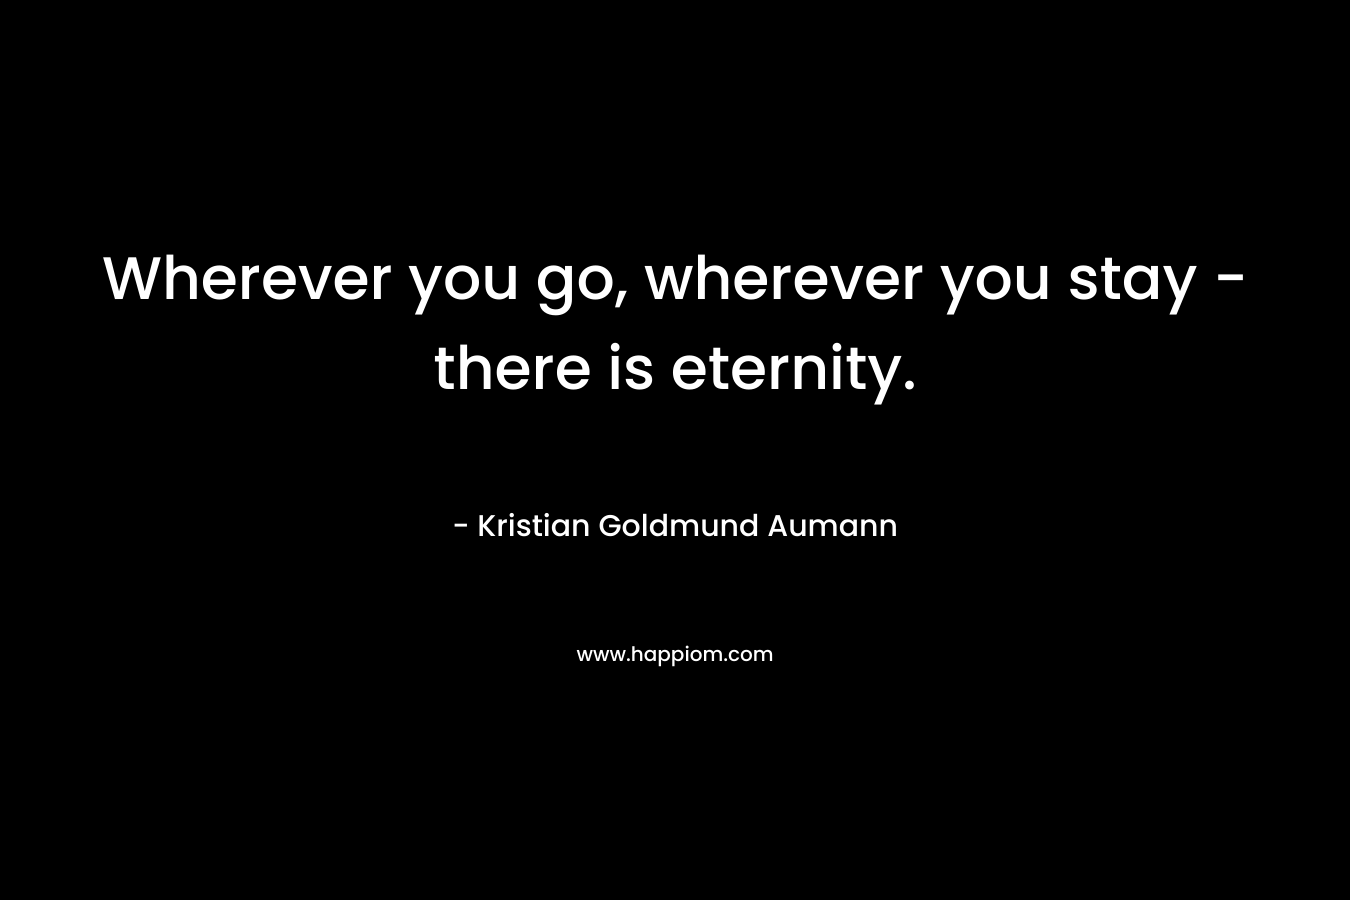 Wherever you go, wherever you stay - there is eternity.